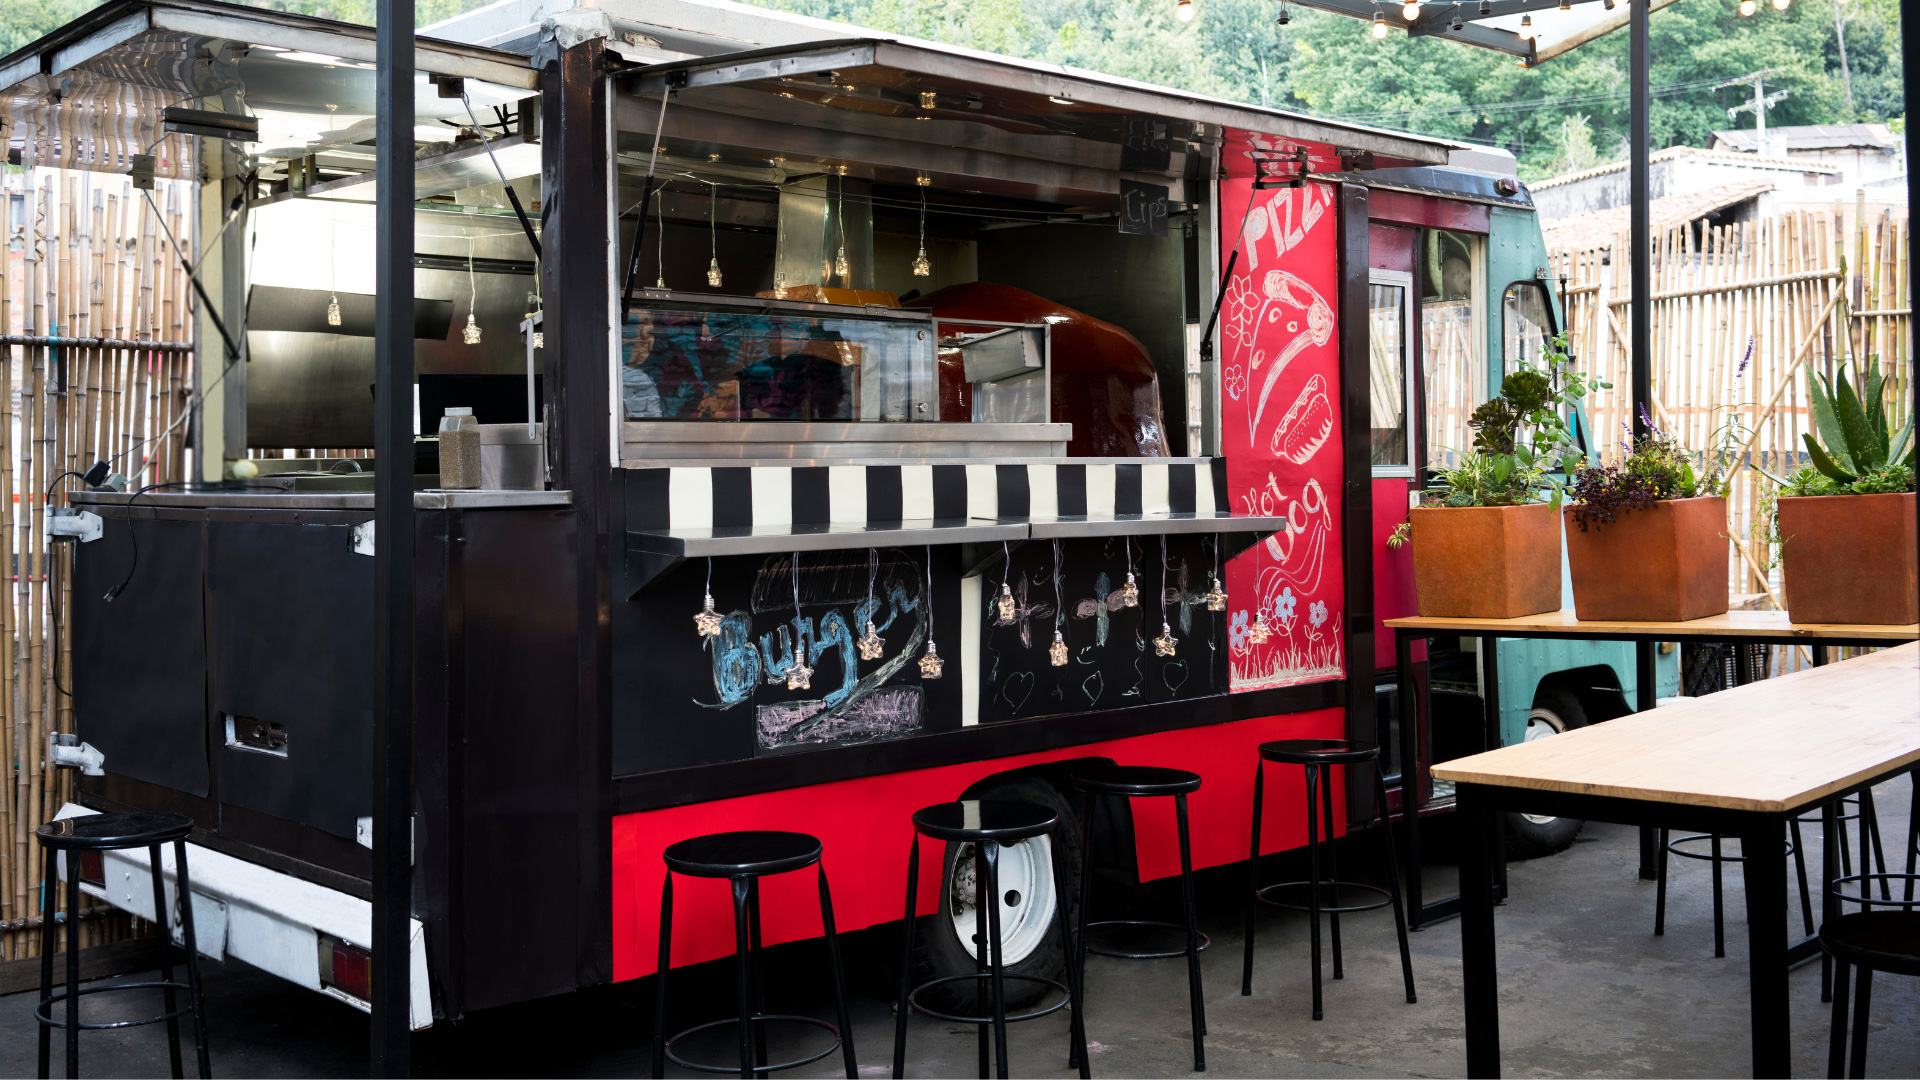 Building a Custom Food Truck or Pre-Owned: The Best Choice for Your Business